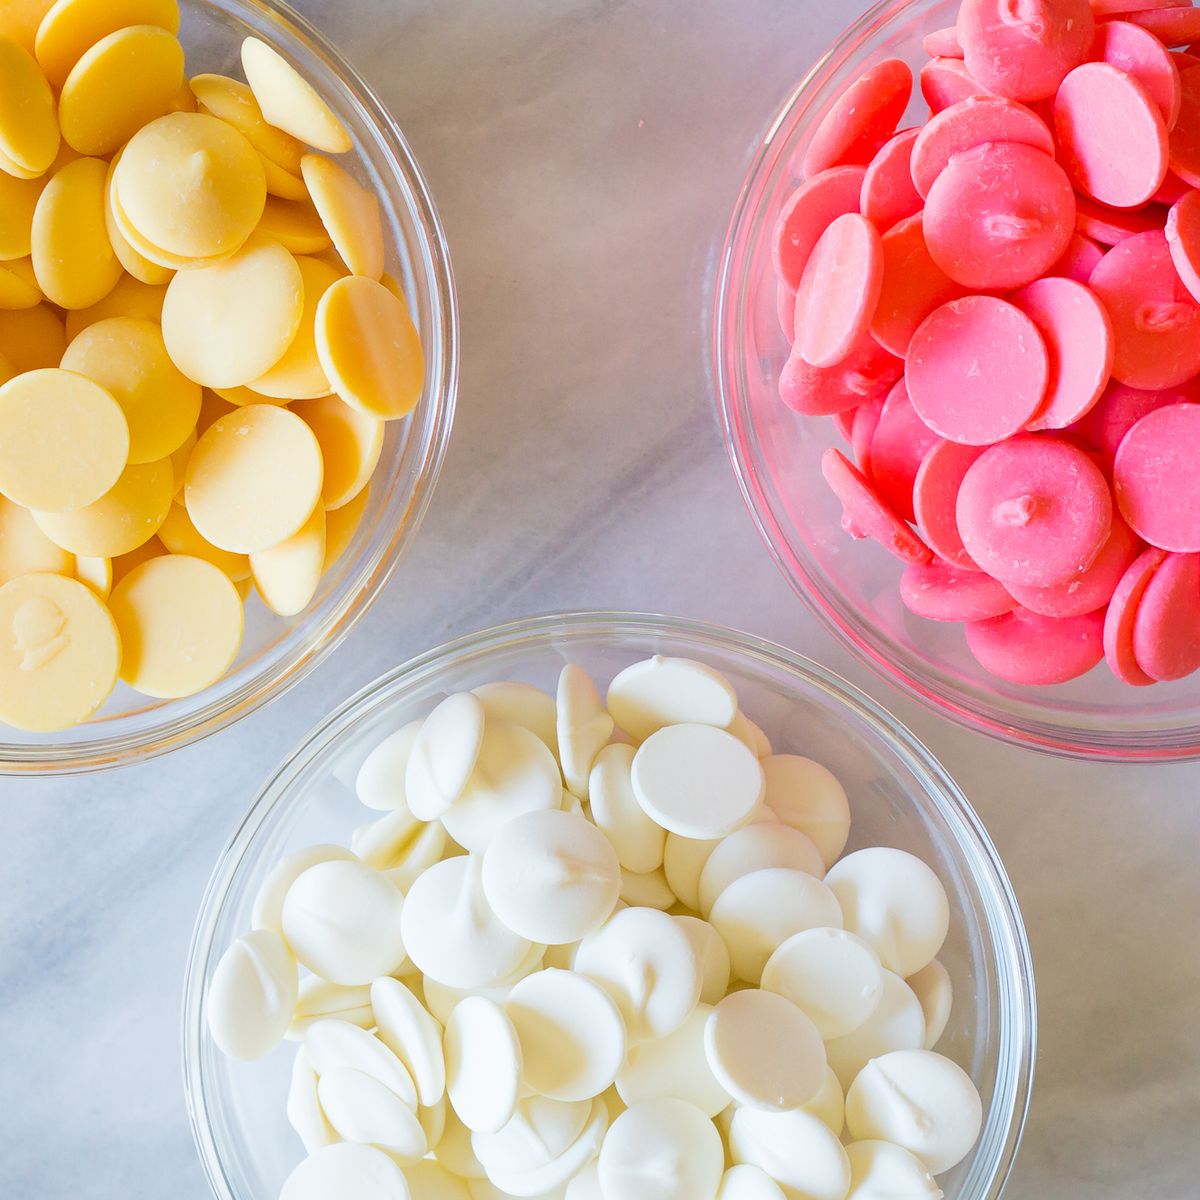 What are Candy Melts?